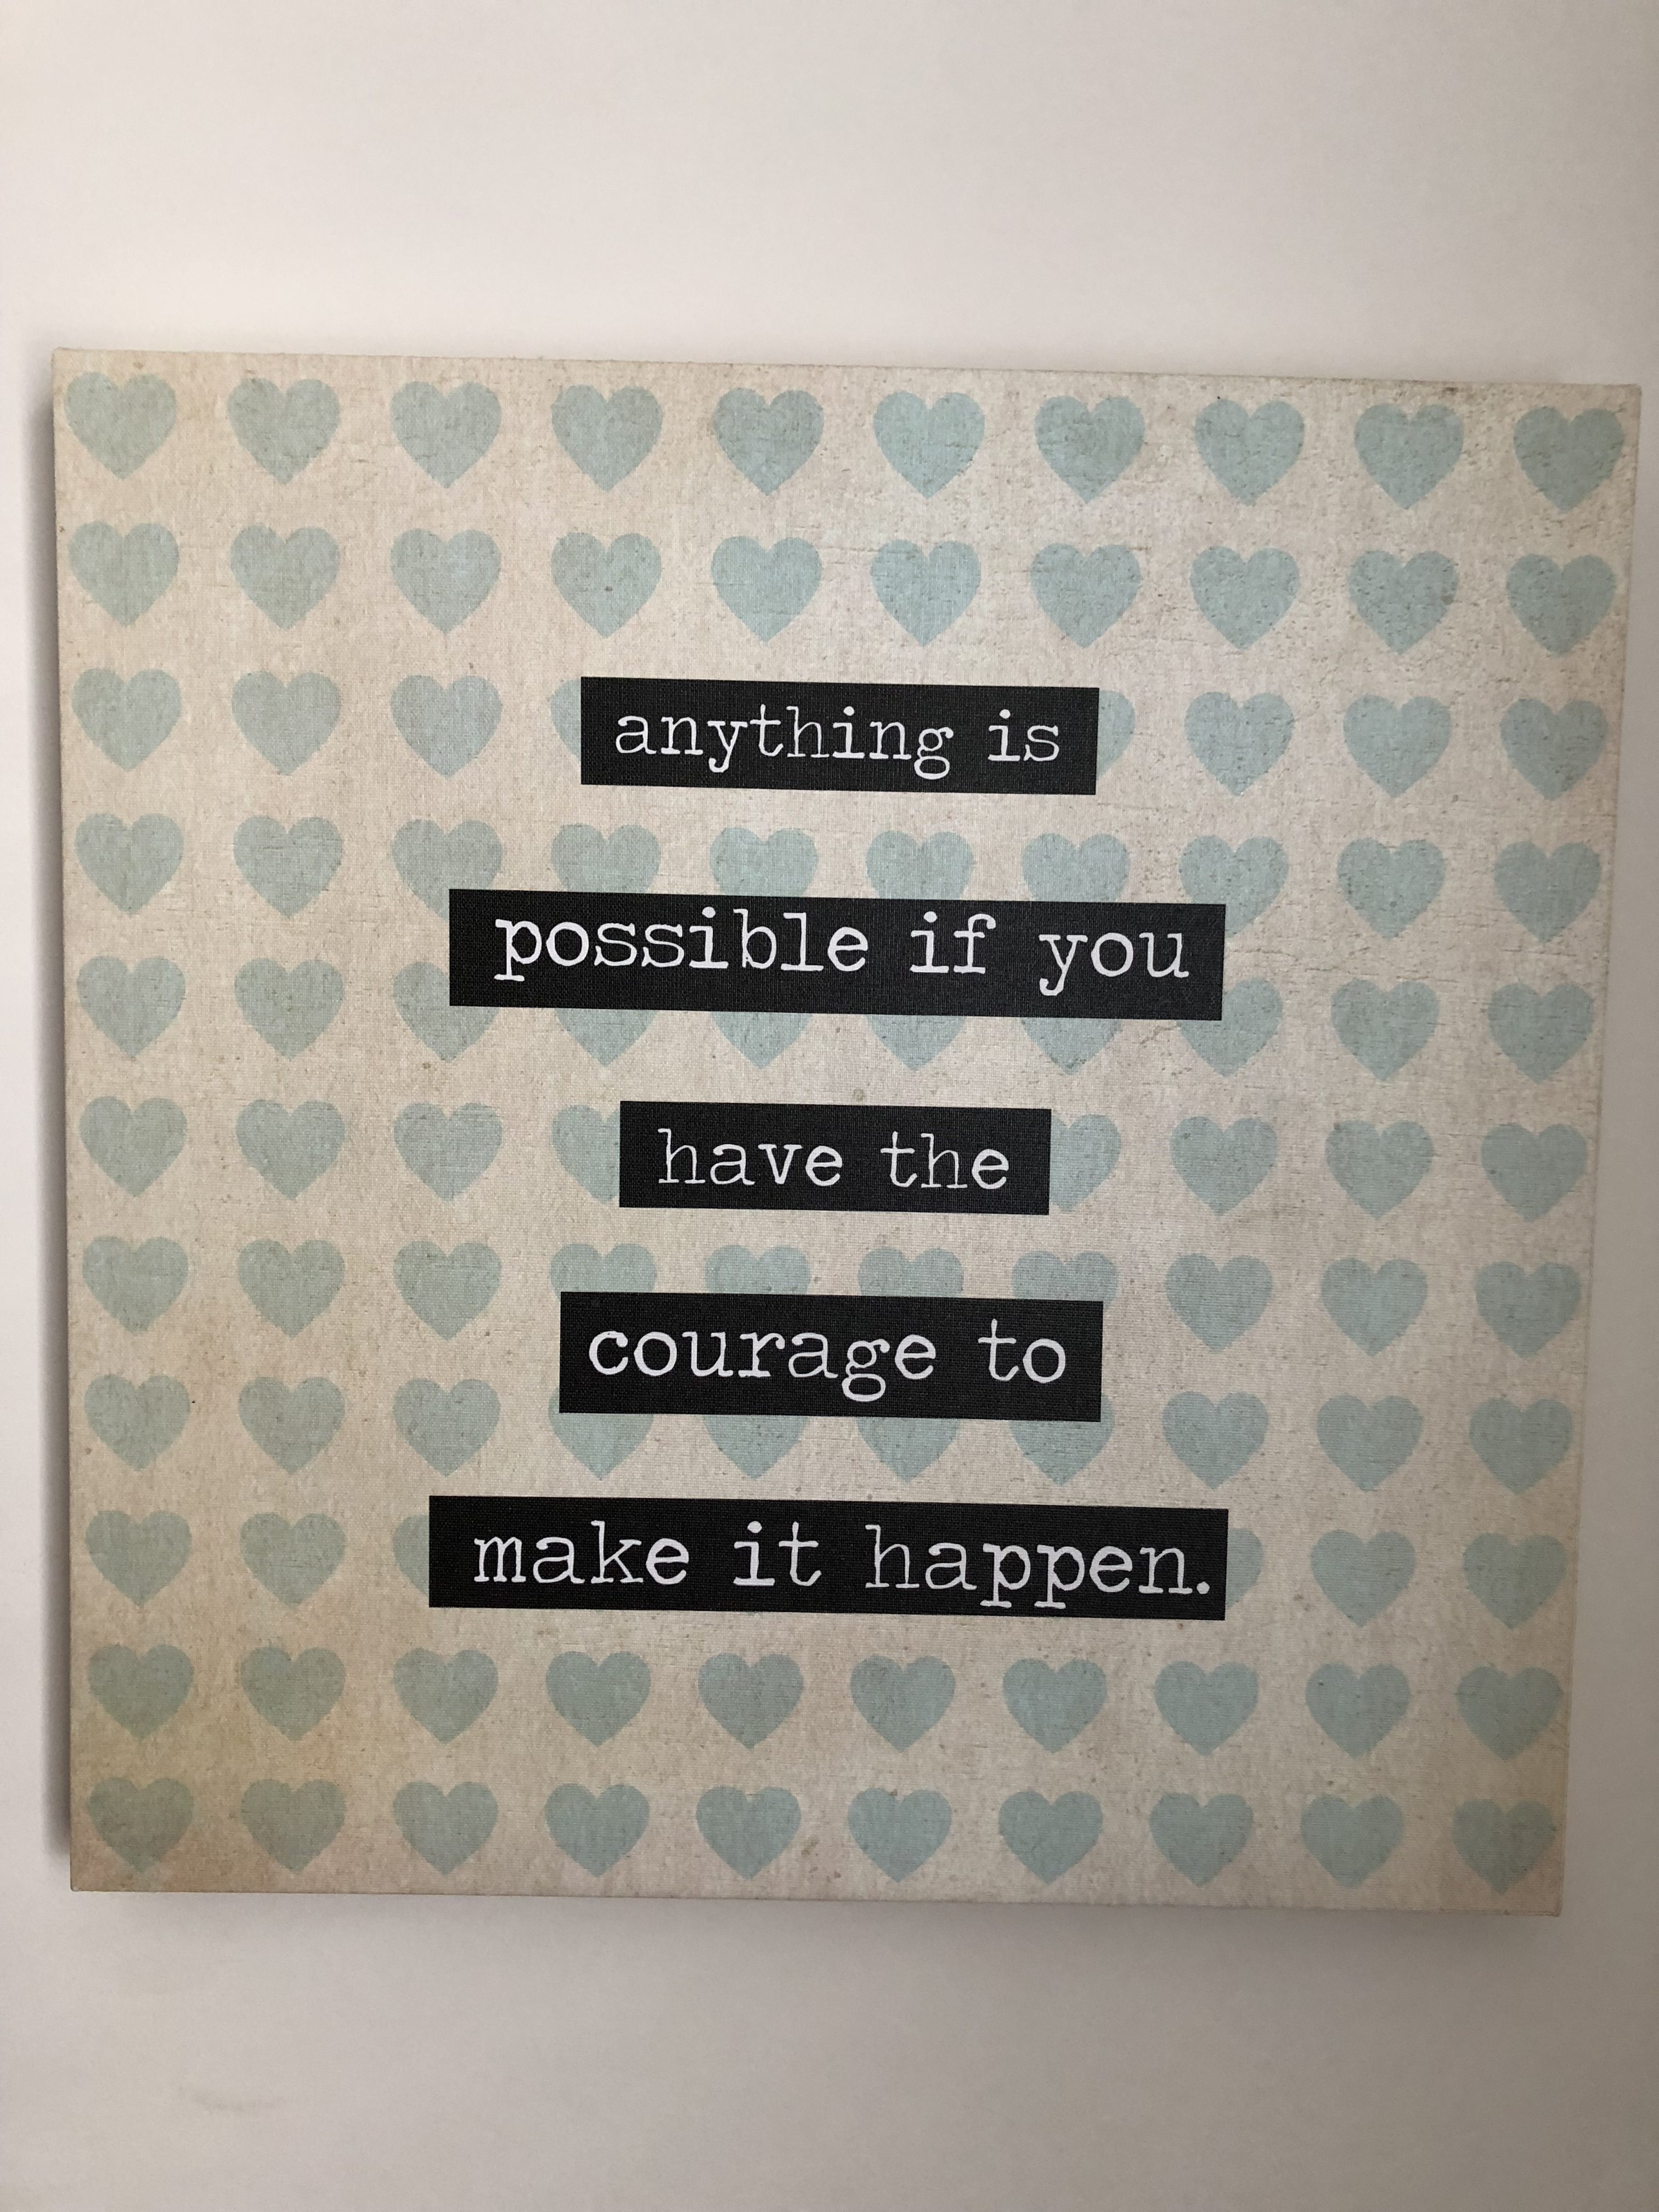 canvas with the saying "anything is possible if you have the courage to make it happen" in white text highlighted by black boxes